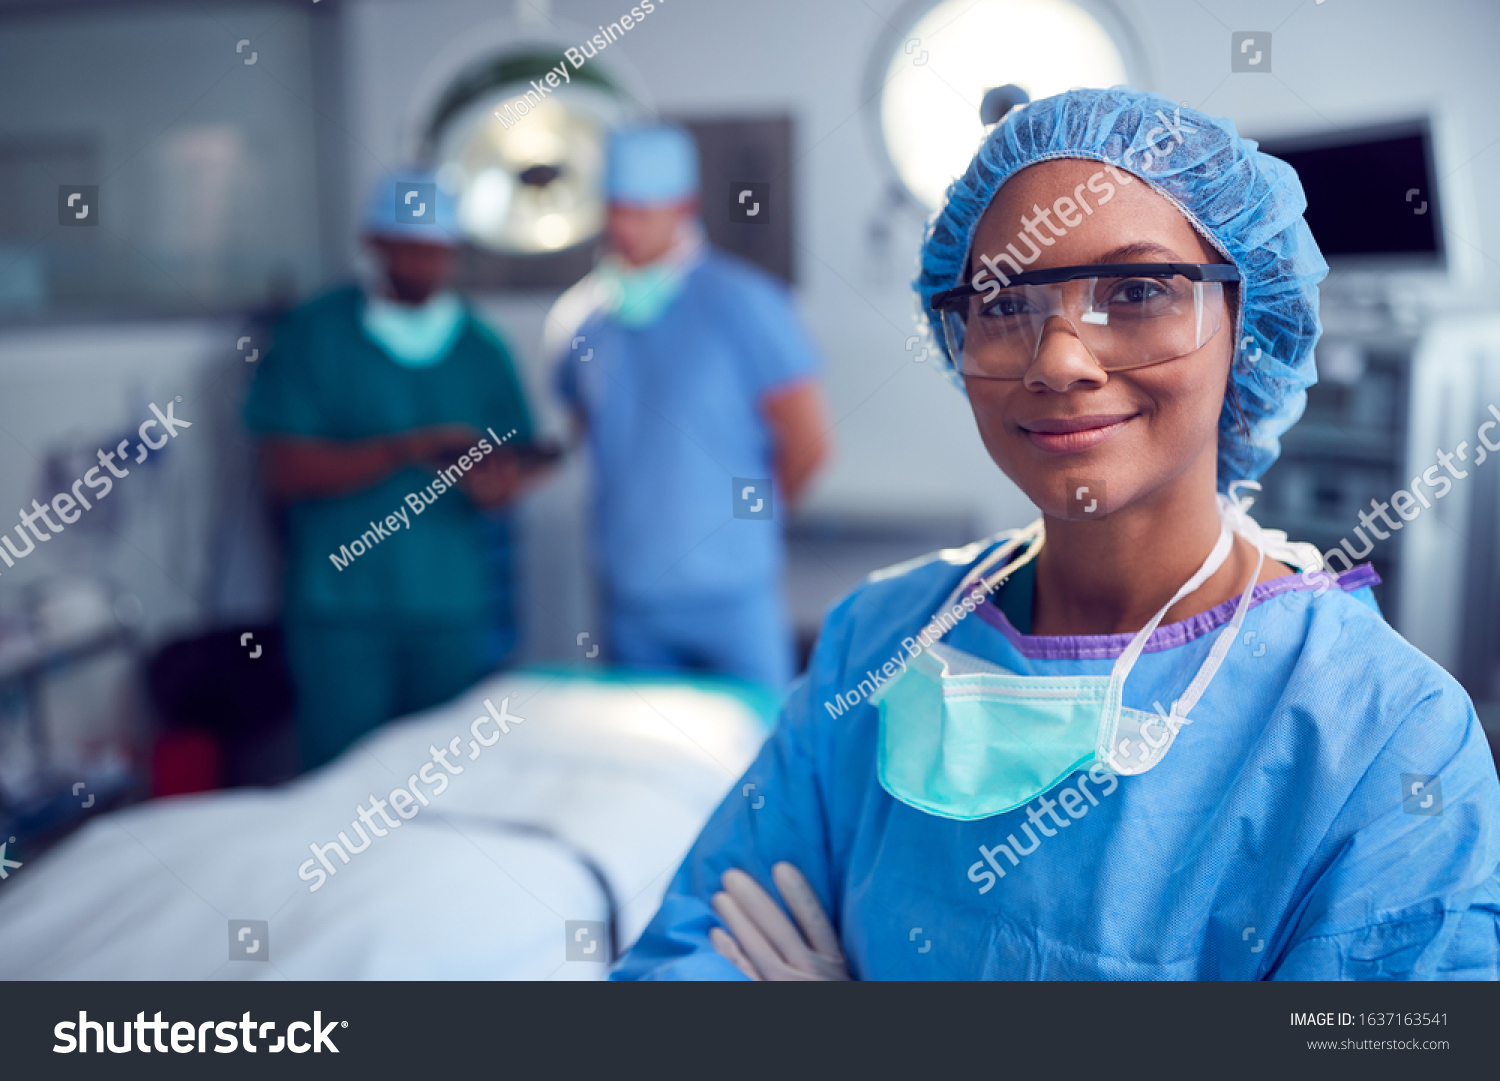 Portrait Of Female Surgeon Wearing Scrubs And Protective Glasses In Hospital Operating Theater #1637163541